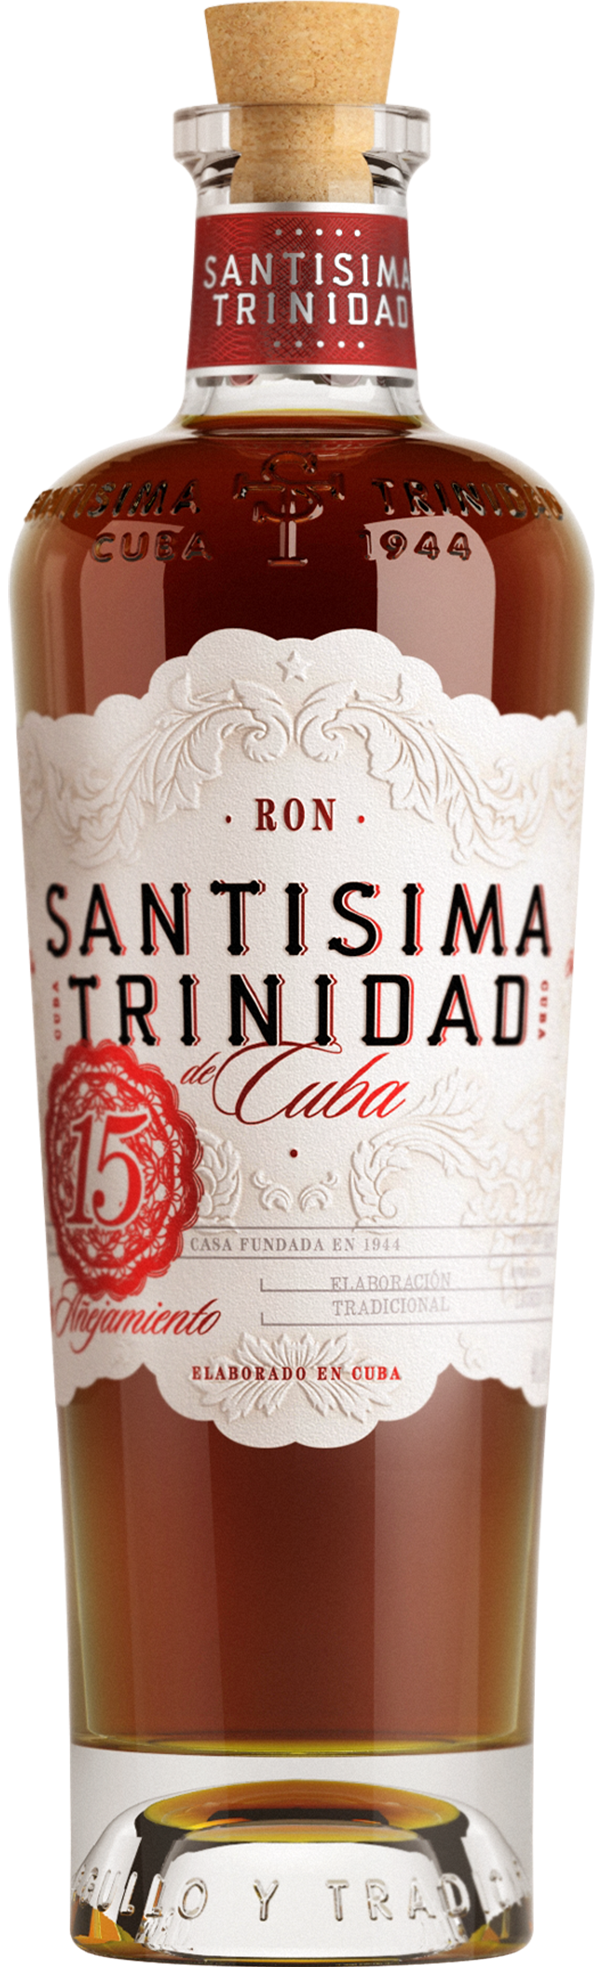 An image of a bottle of classy Santisima Trinidad 15 year old Rum, one of the Best Premium Caribbean Rums